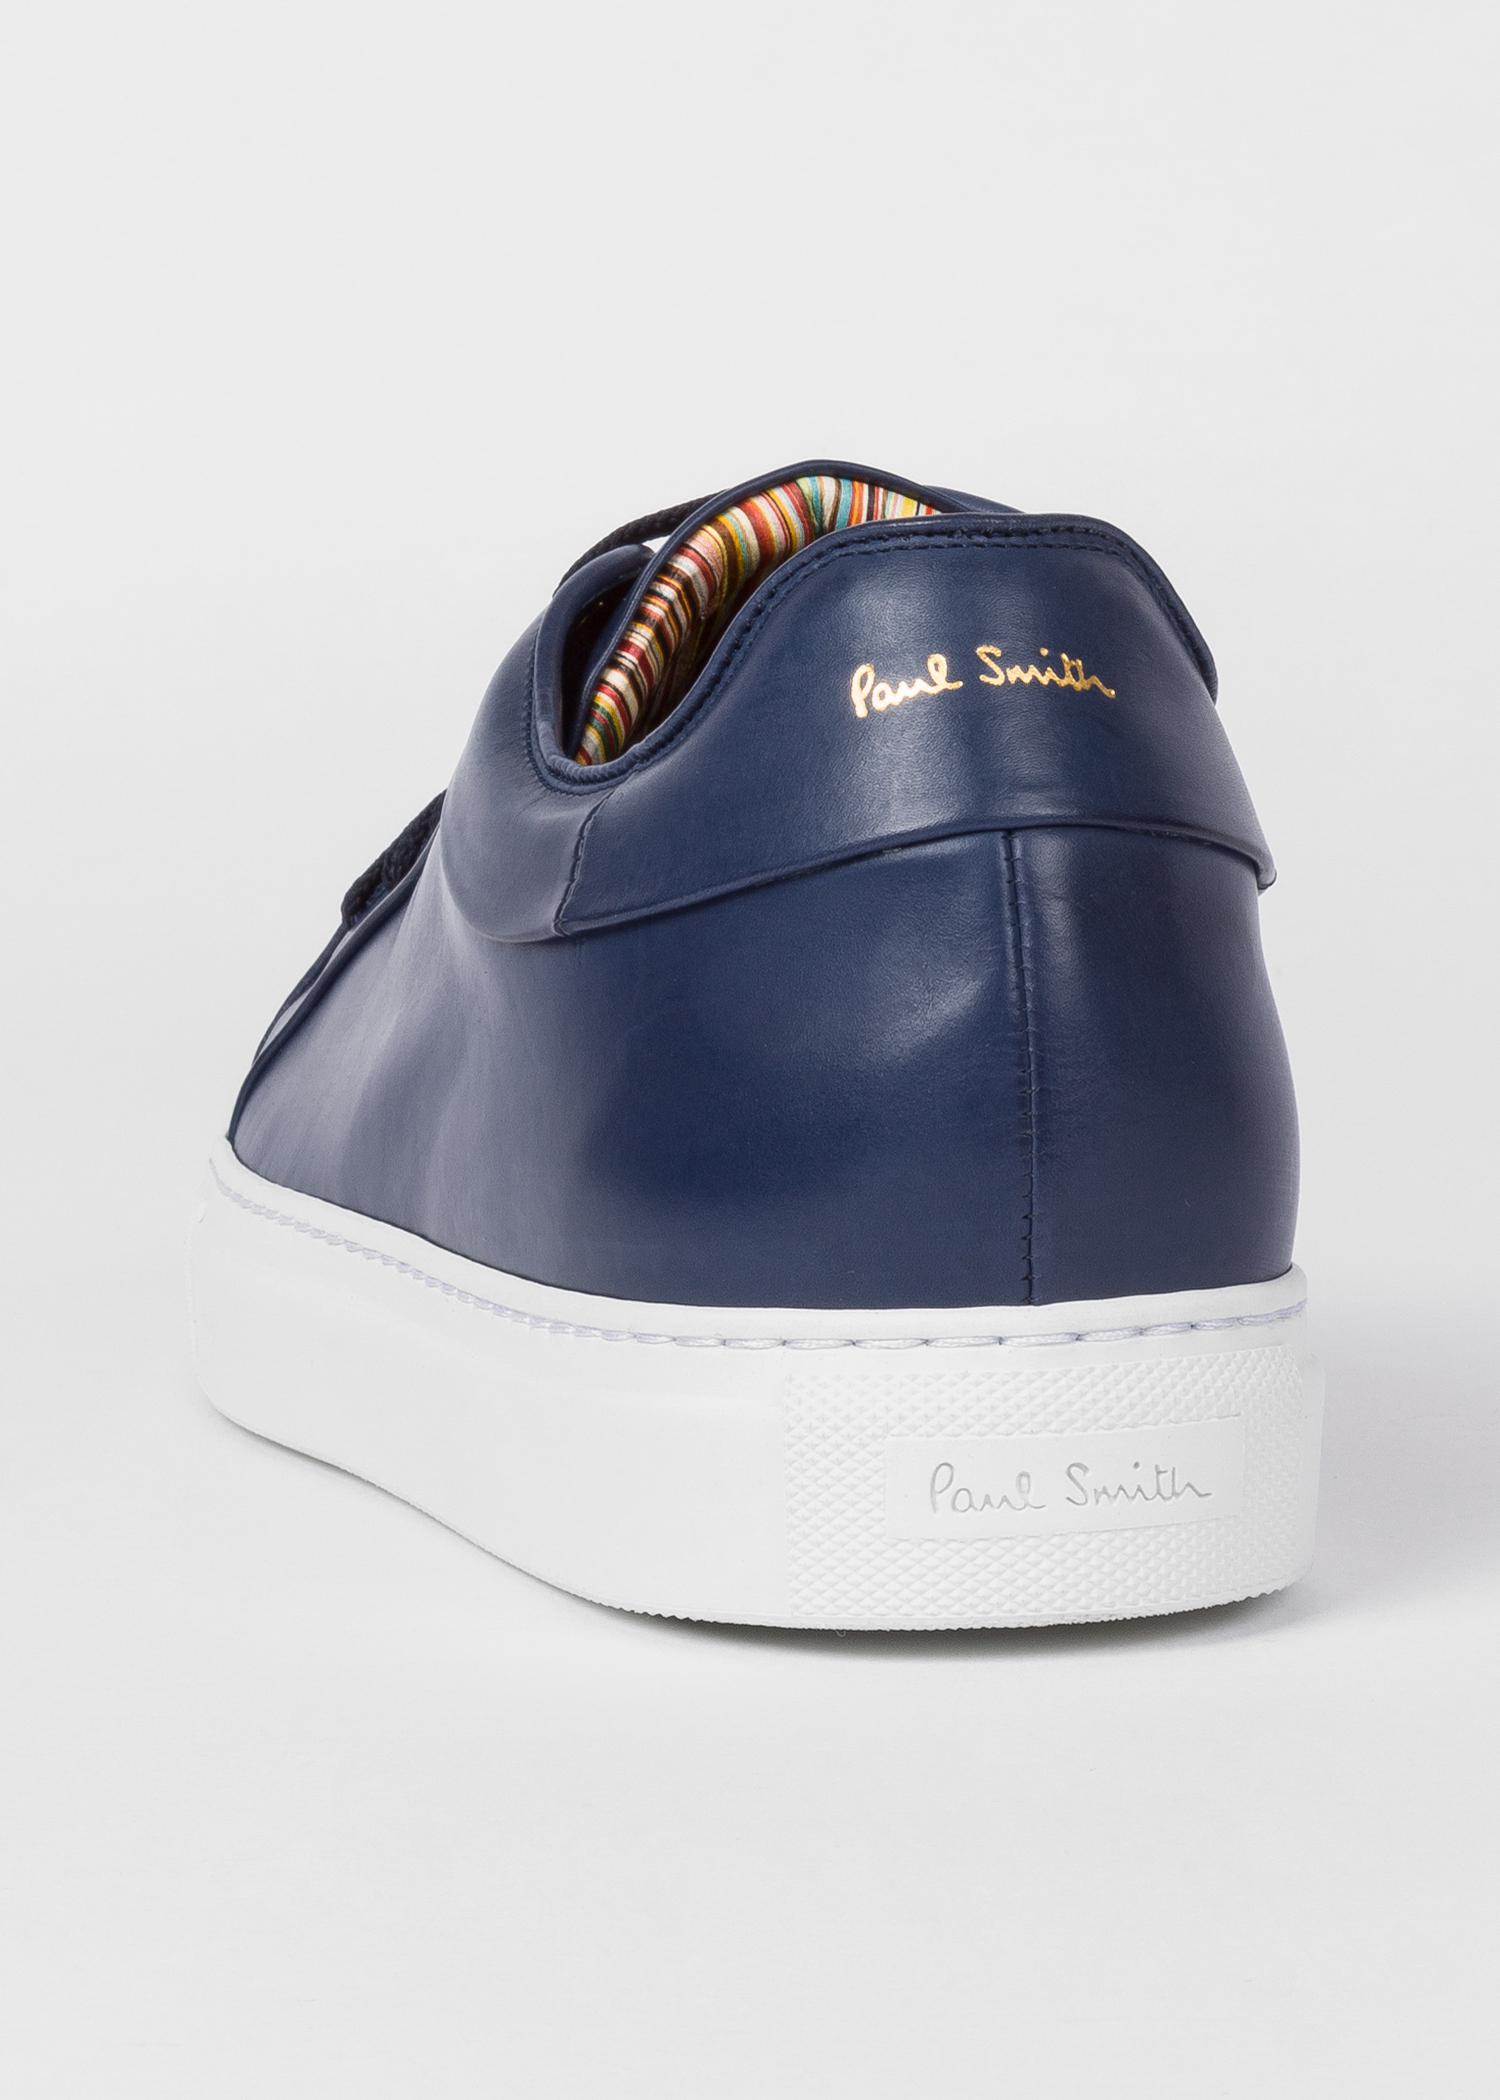 Paul Smith Dark Navy Leather 'Basso' Trainers in Blue for Men - Lyst